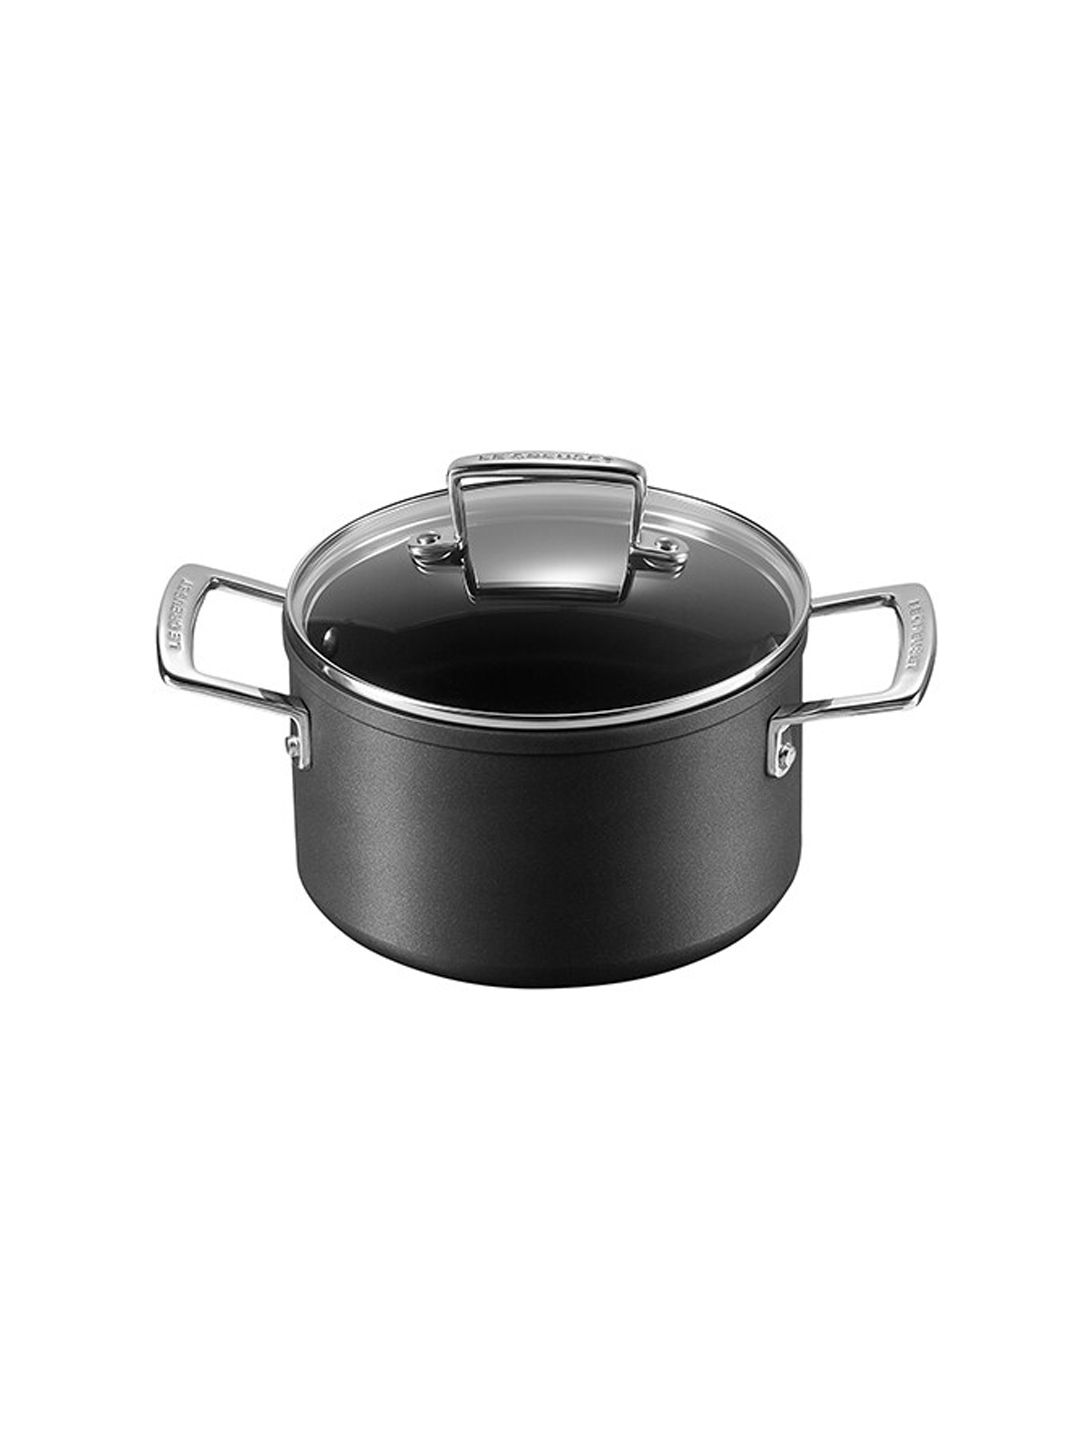 LE CREUSET Black Solid Stainless Steel Deep Casserole Price in India